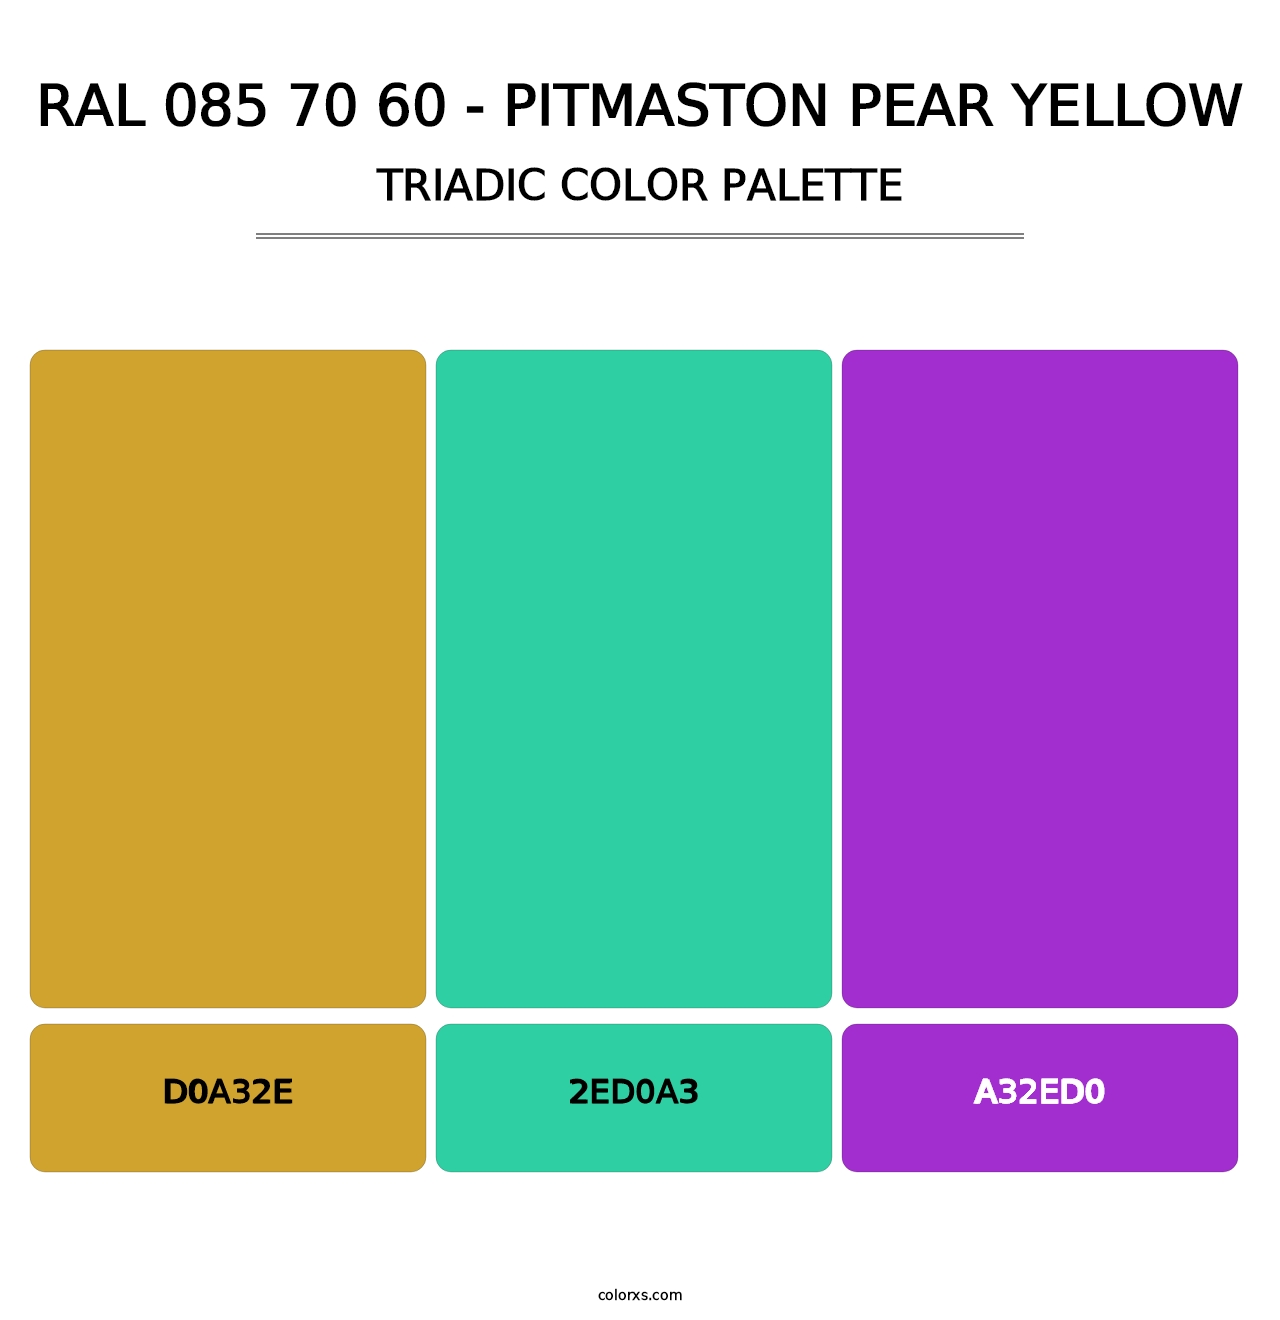 RAL 085 70 60 - Pitmaston Pear Yellow - Triadic Color Palette